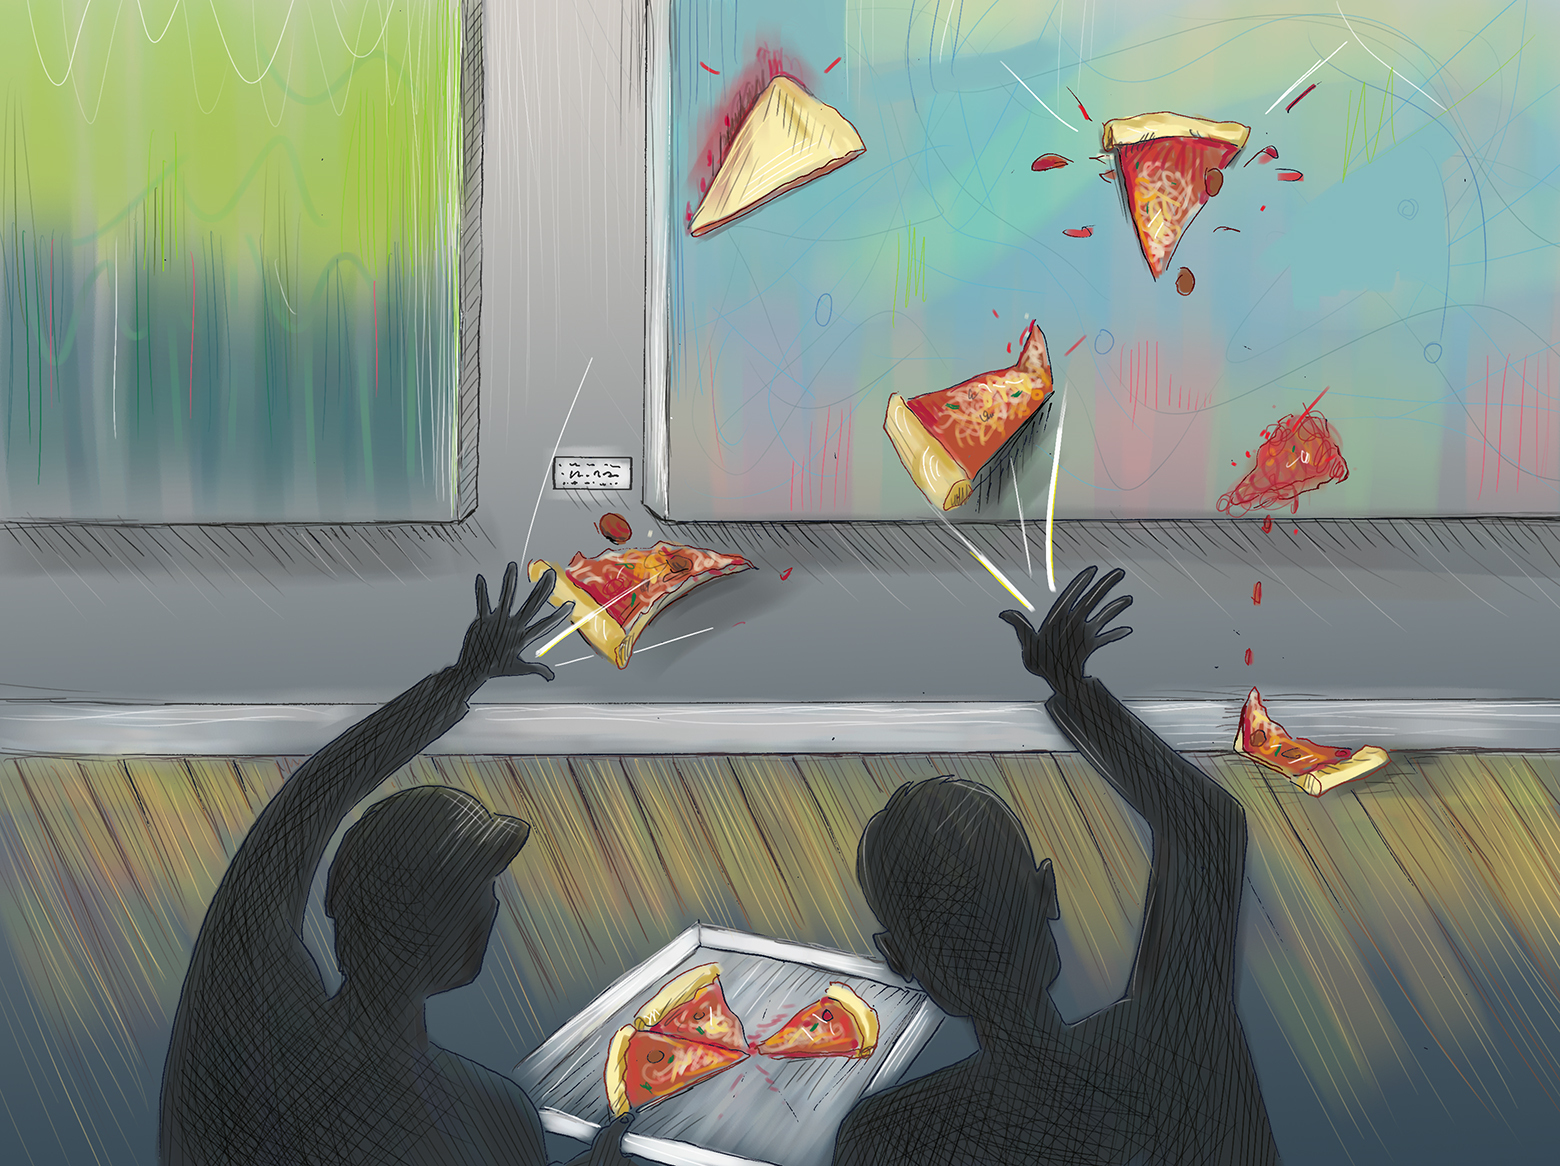 An illustration of two activists throwing slices of pieces at paintings in a museum.